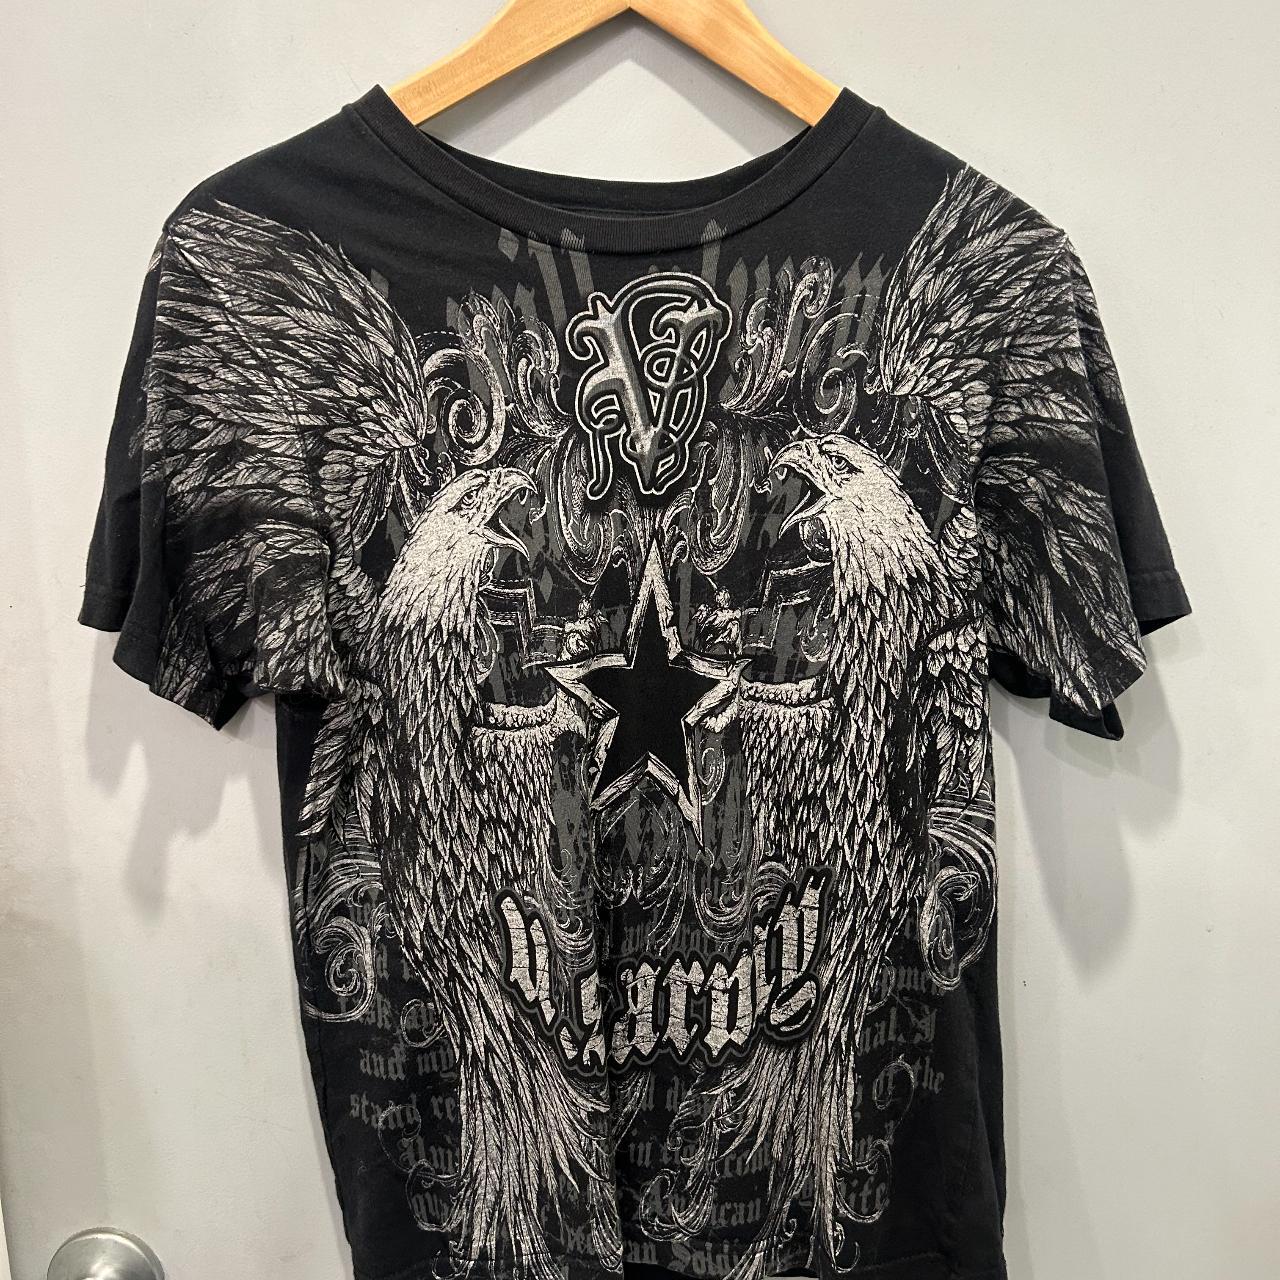 small apprime affliction like tee - Depop